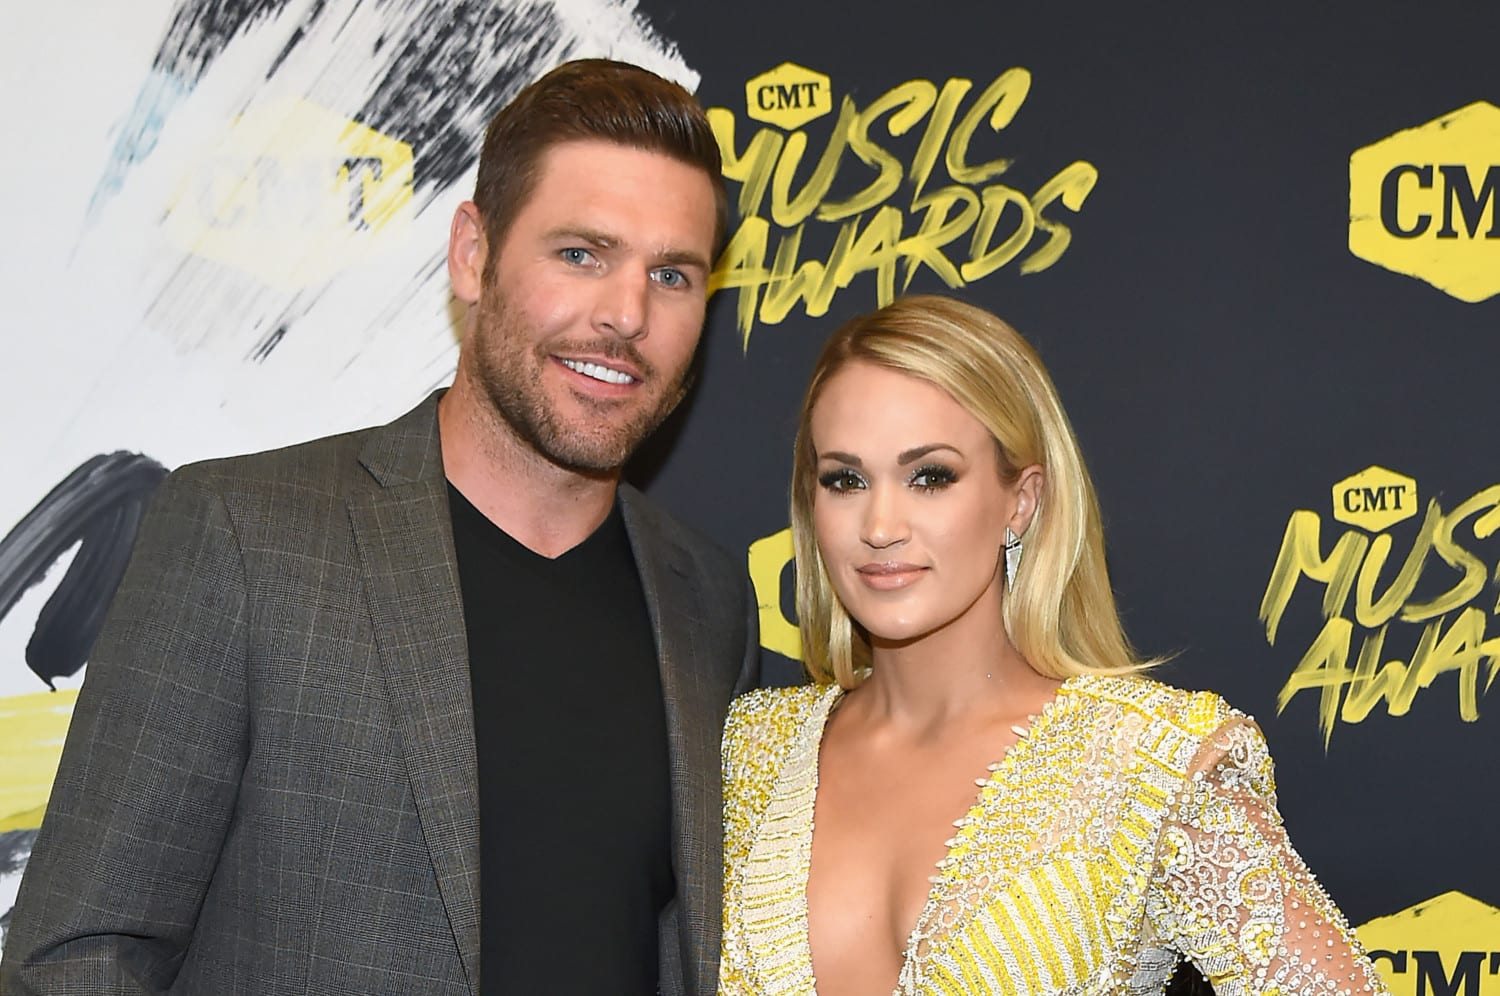 Carrie Underwood and Mike Fisher photo